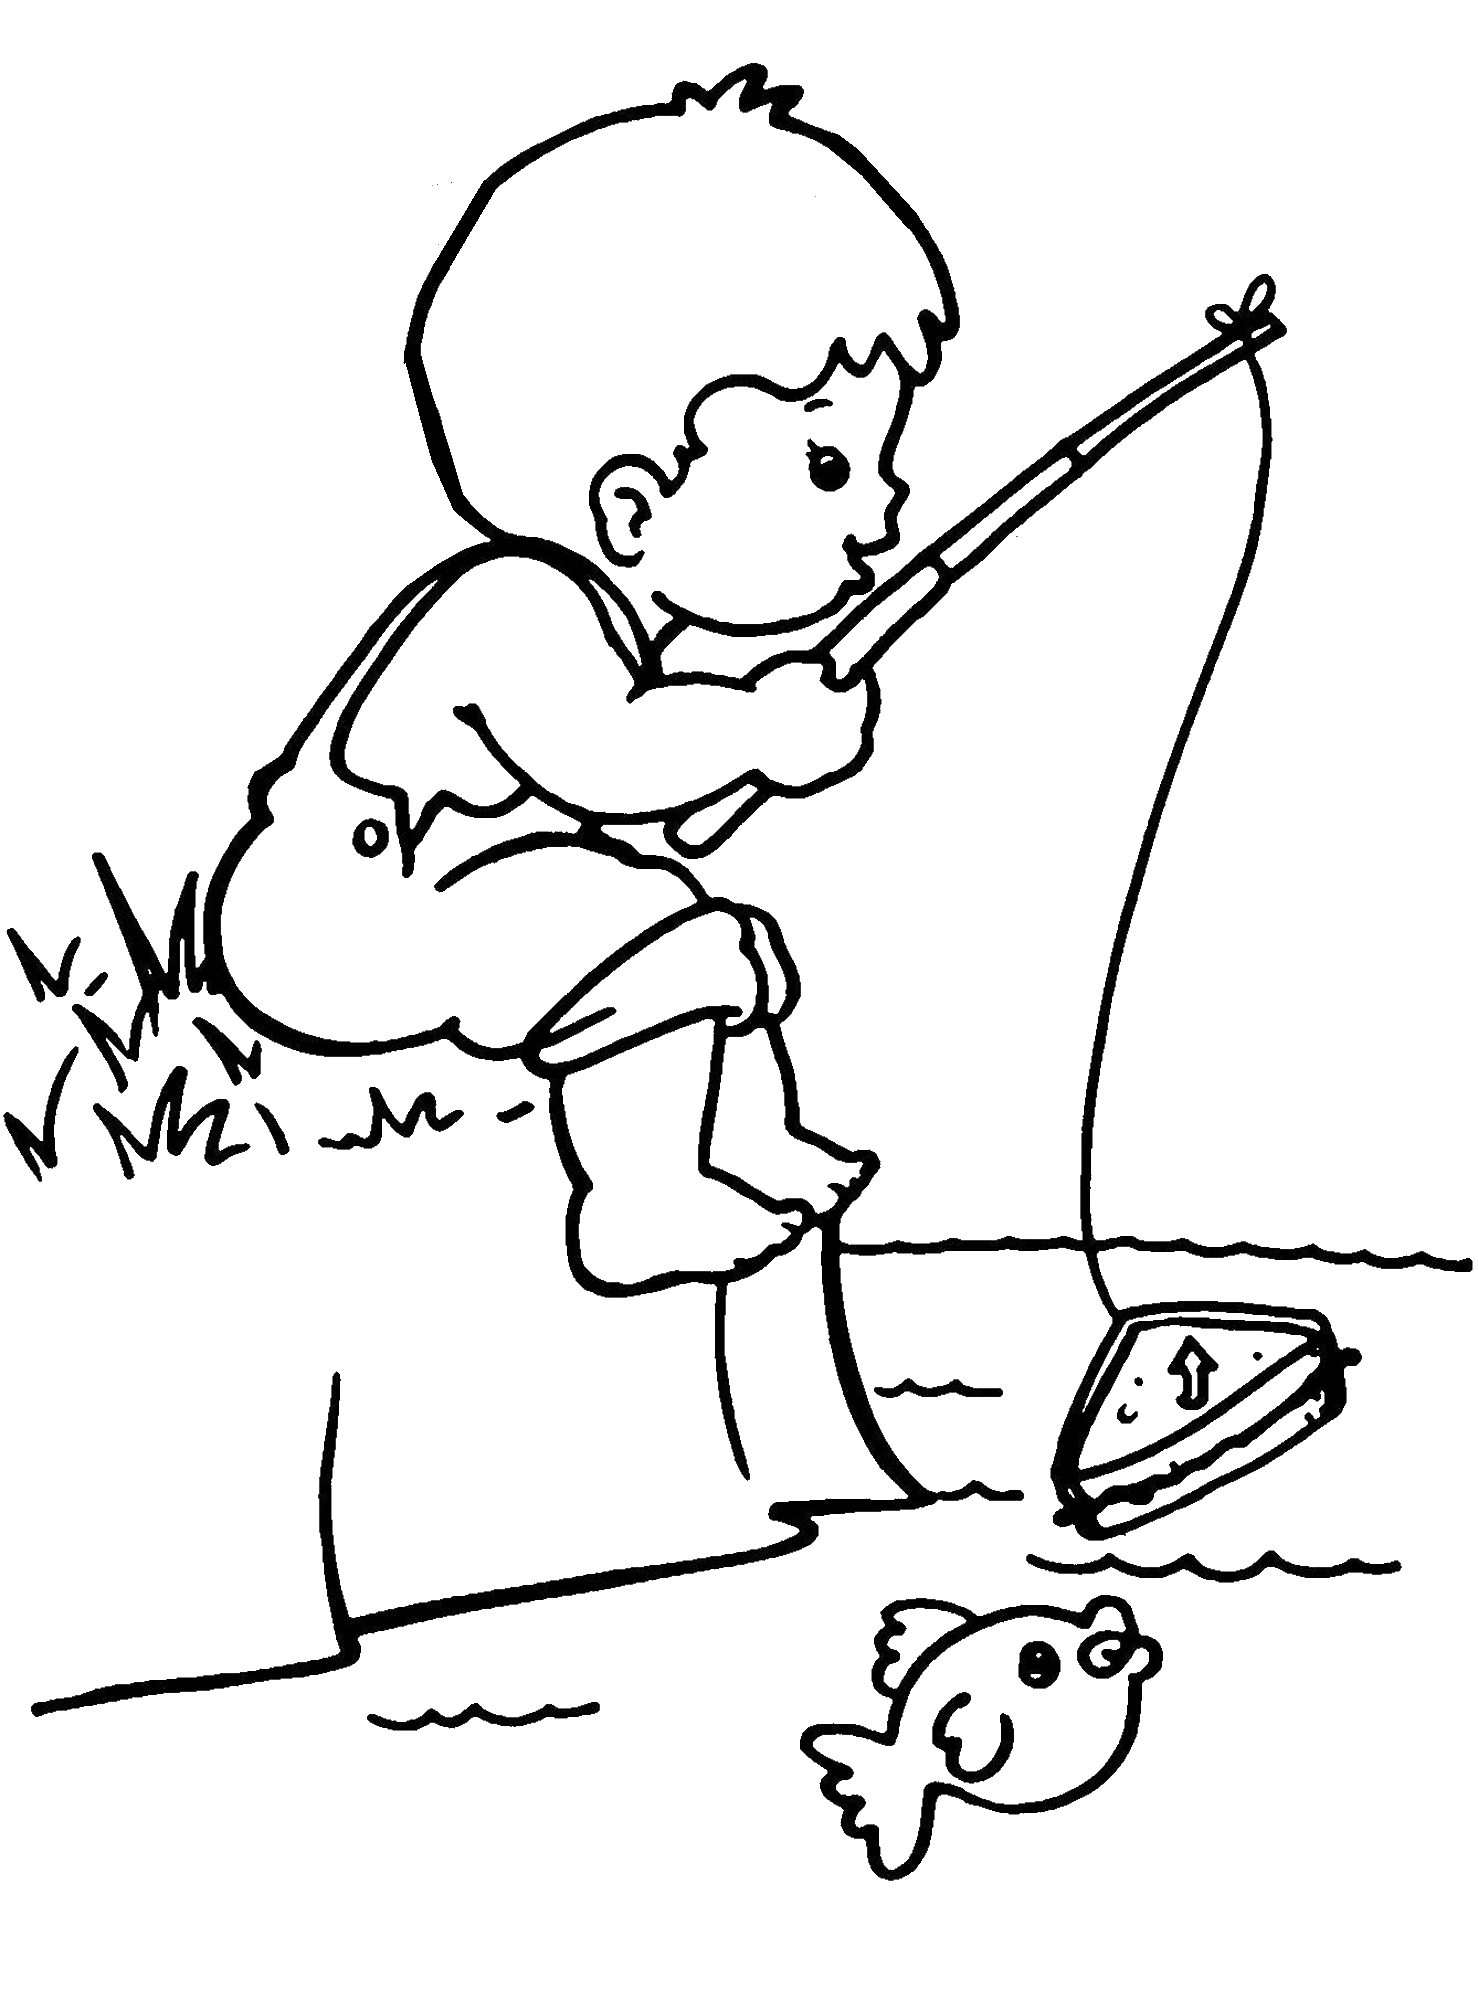 Creative Fishing Pole Coloring Pages Printable 32